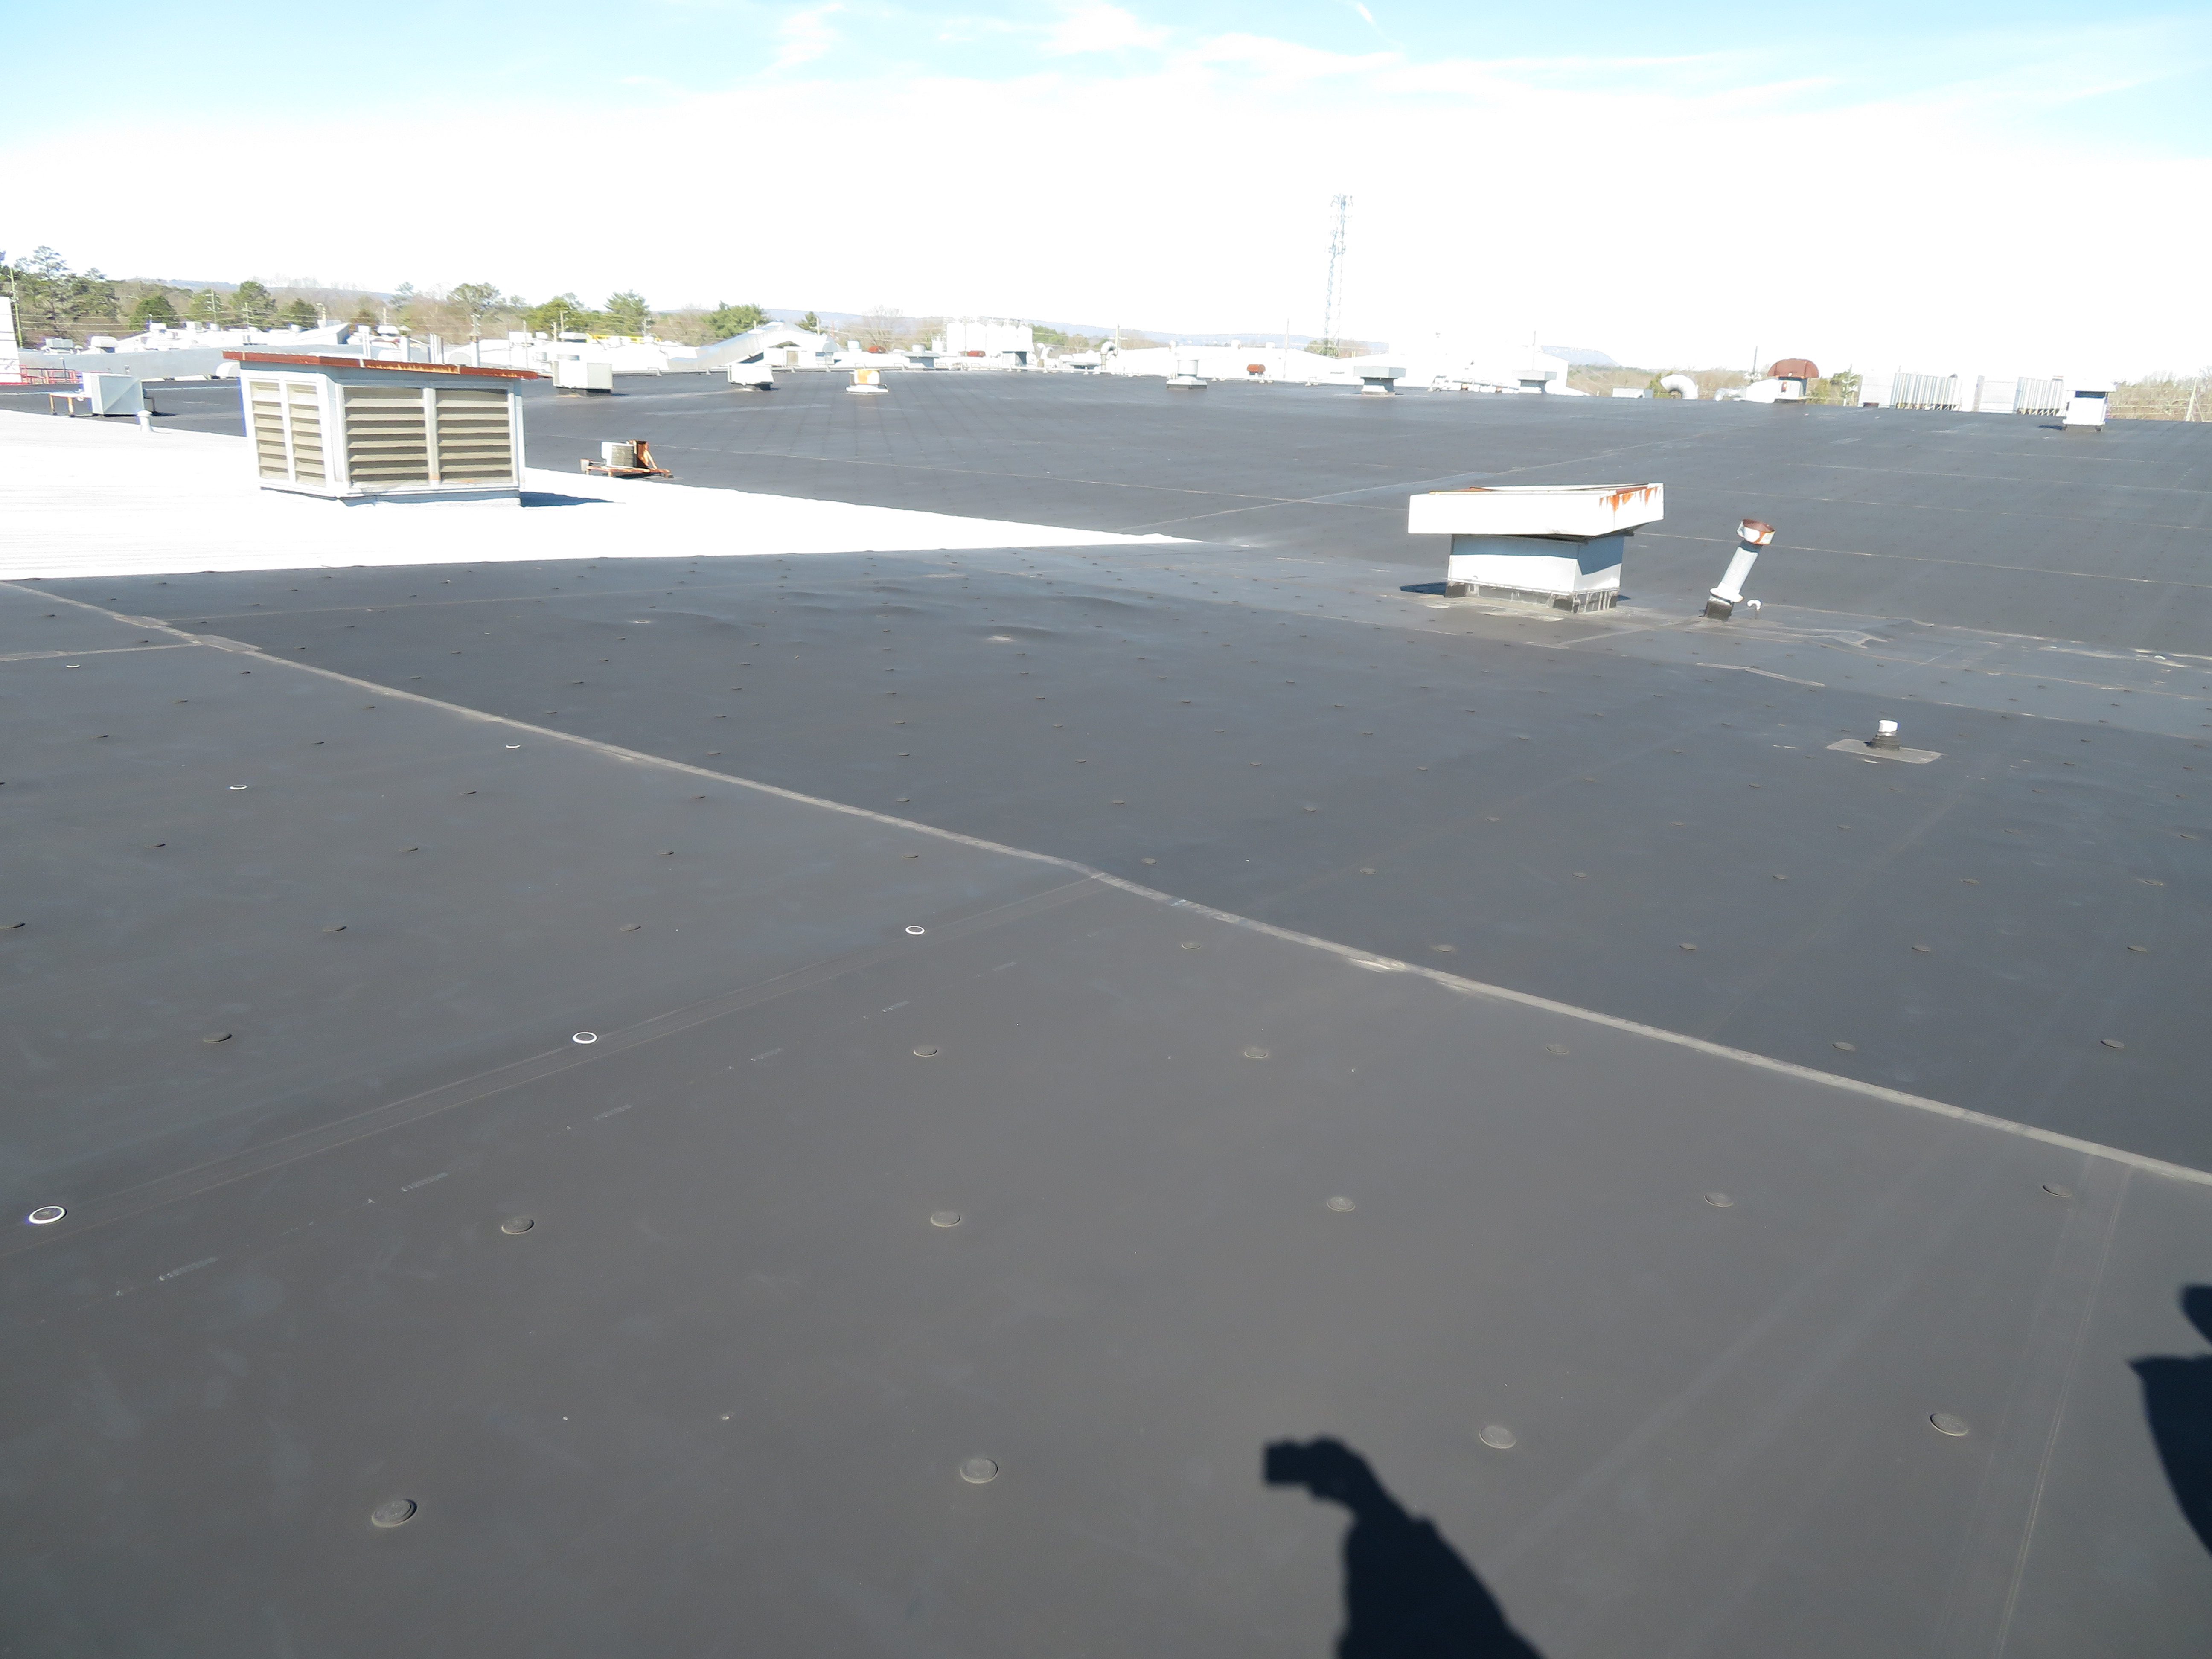 EPDM Roofing System